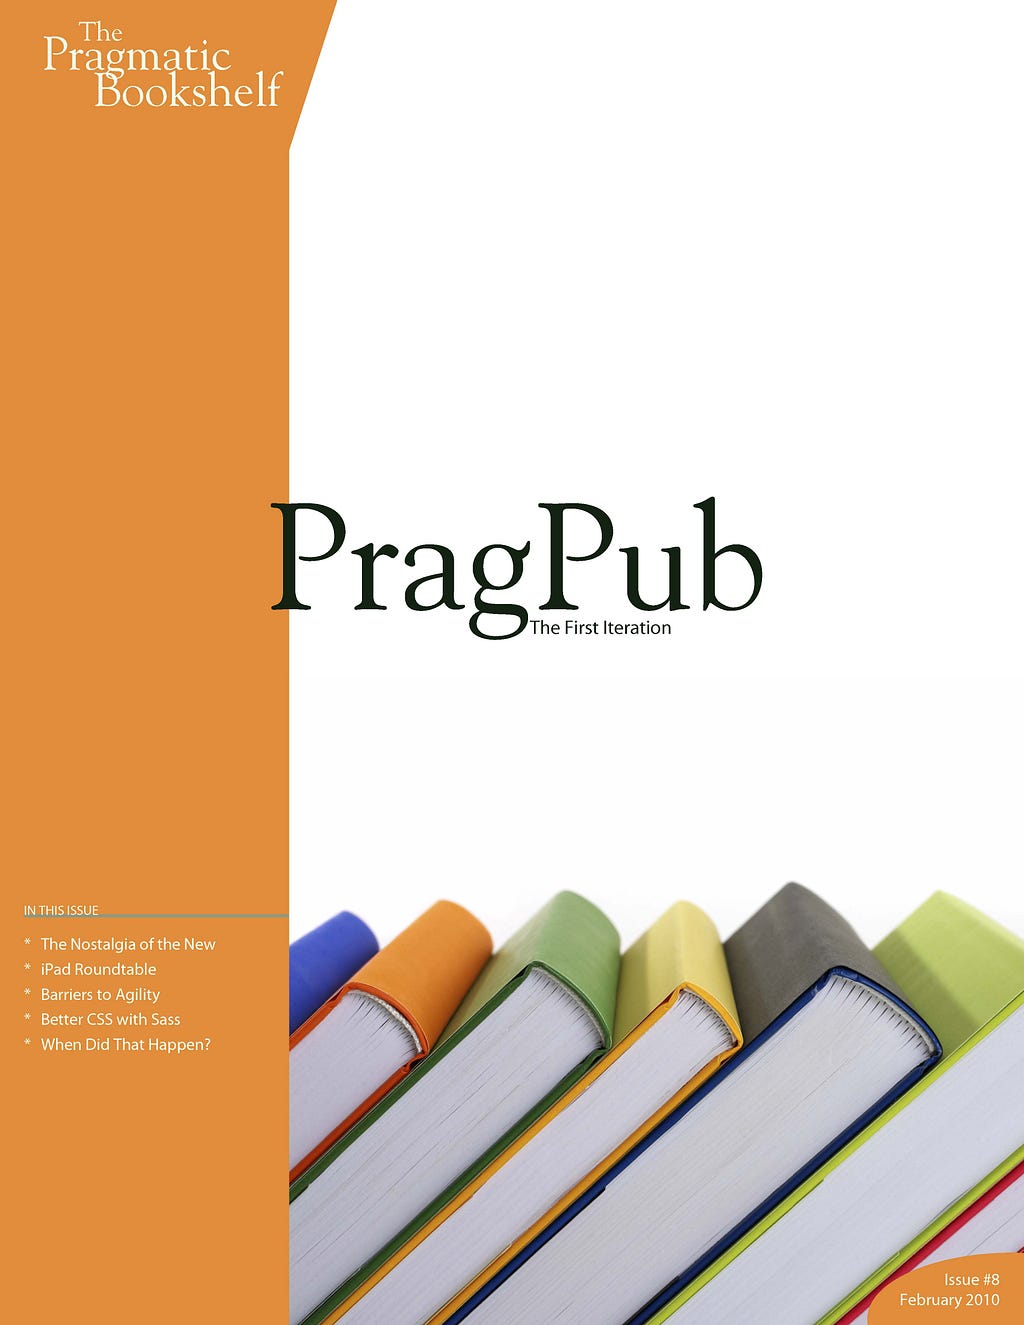 magazine cover showing book spines in orange, green, yellow, blue, and black